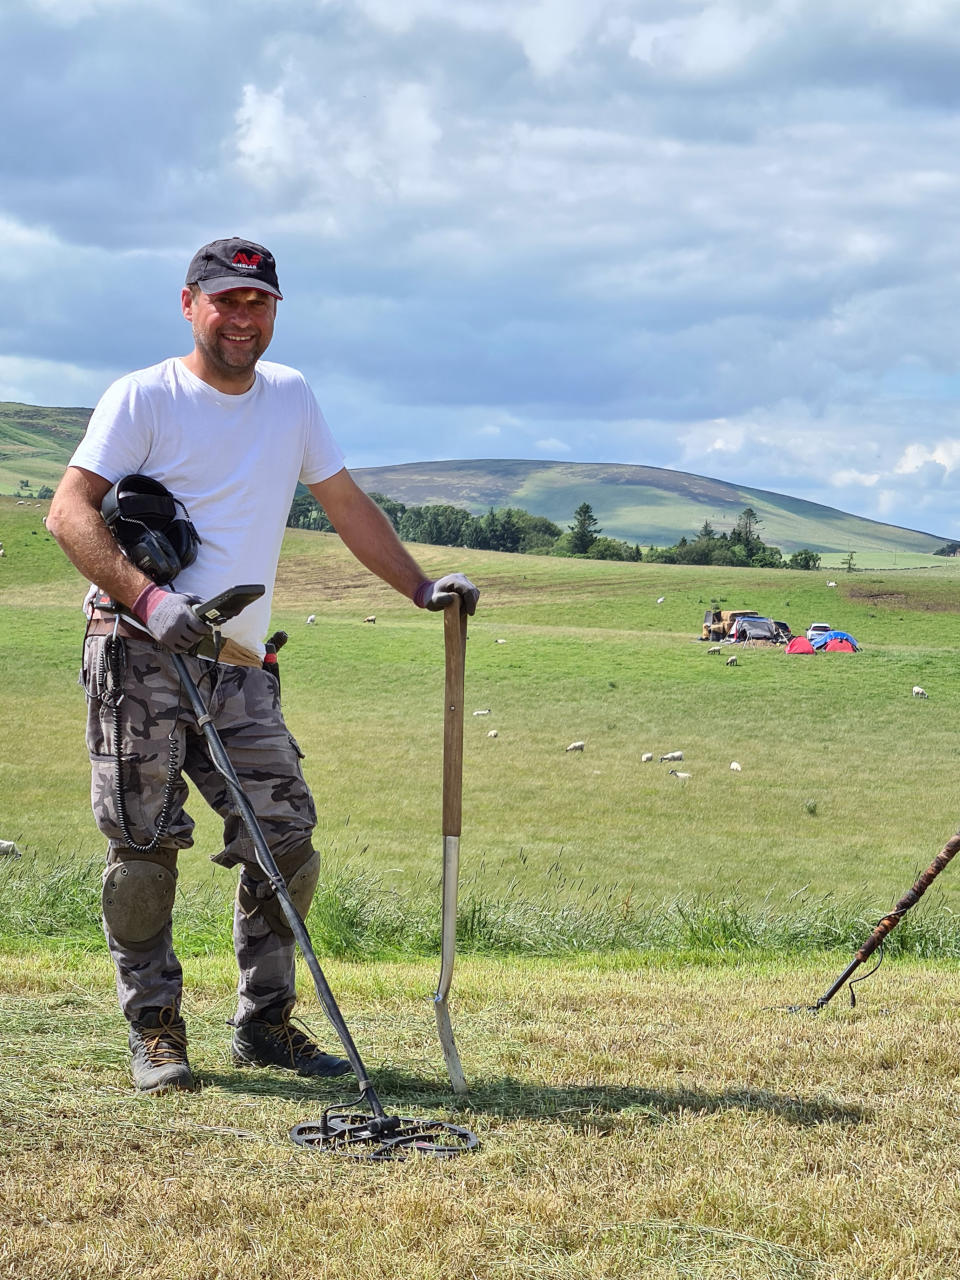 Mariusz Stepien at the excavation near Peebles, after he found objects believed to be decorative and functional pieces of a Bronze Age harness. (Crown Office Communications/PA Wire)